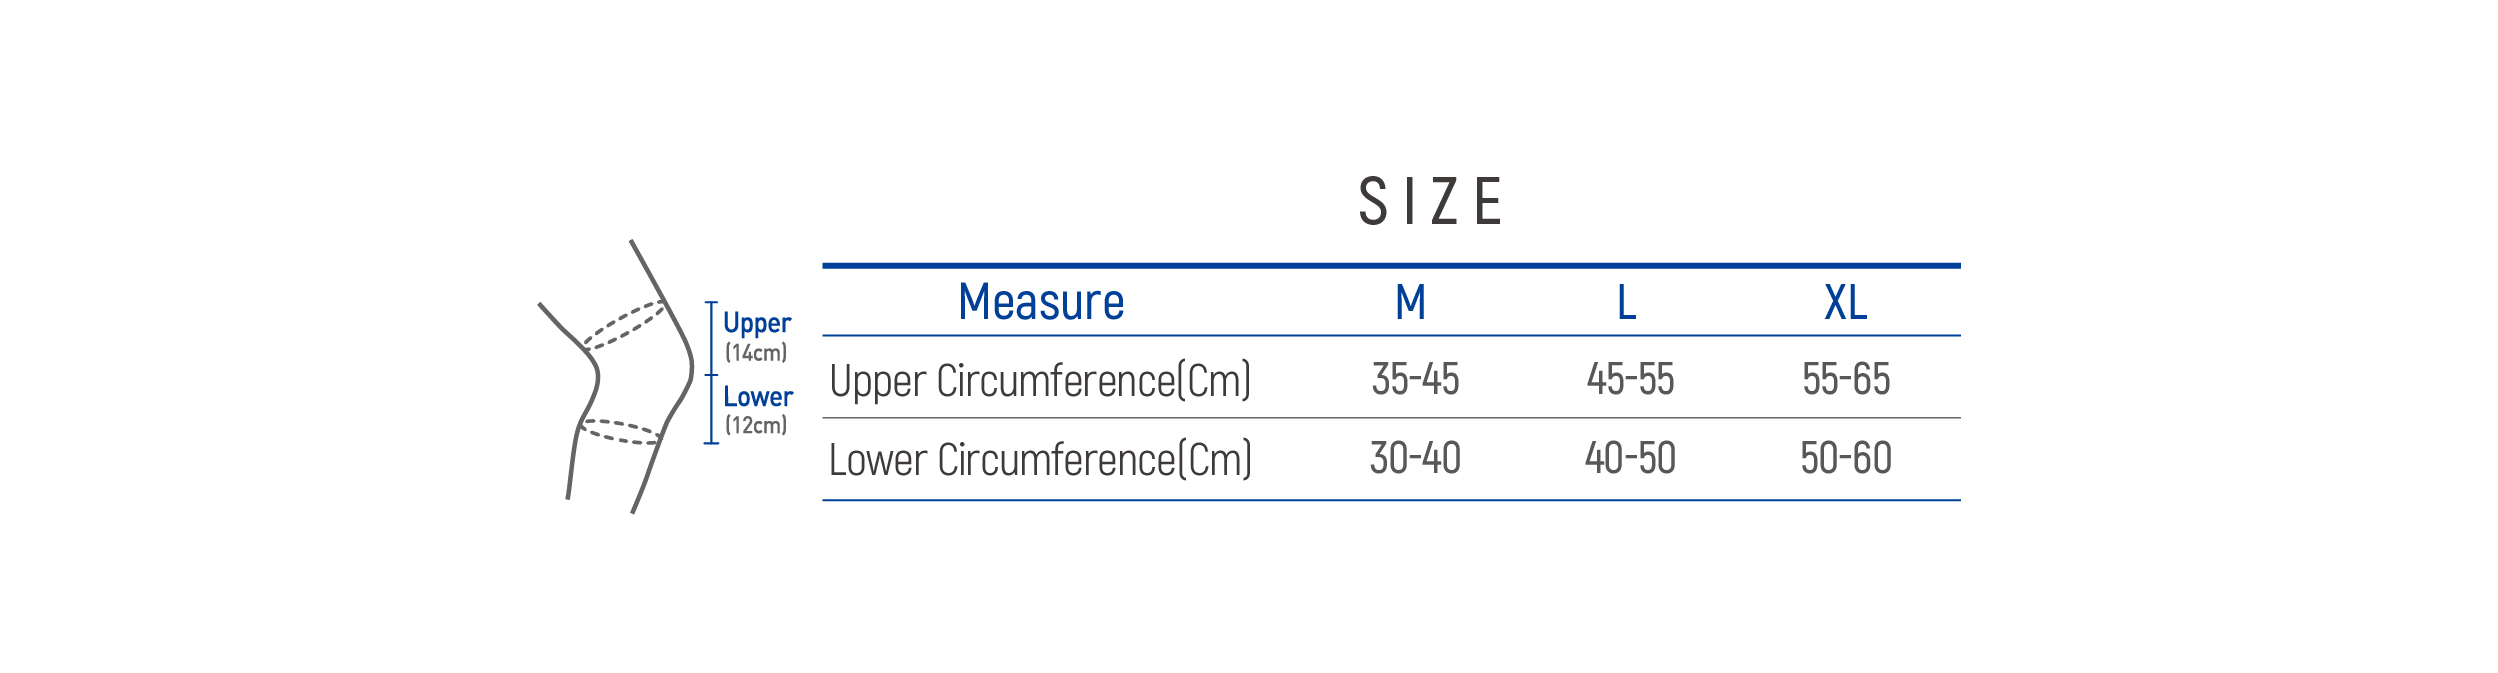 DR-K092 Size table image